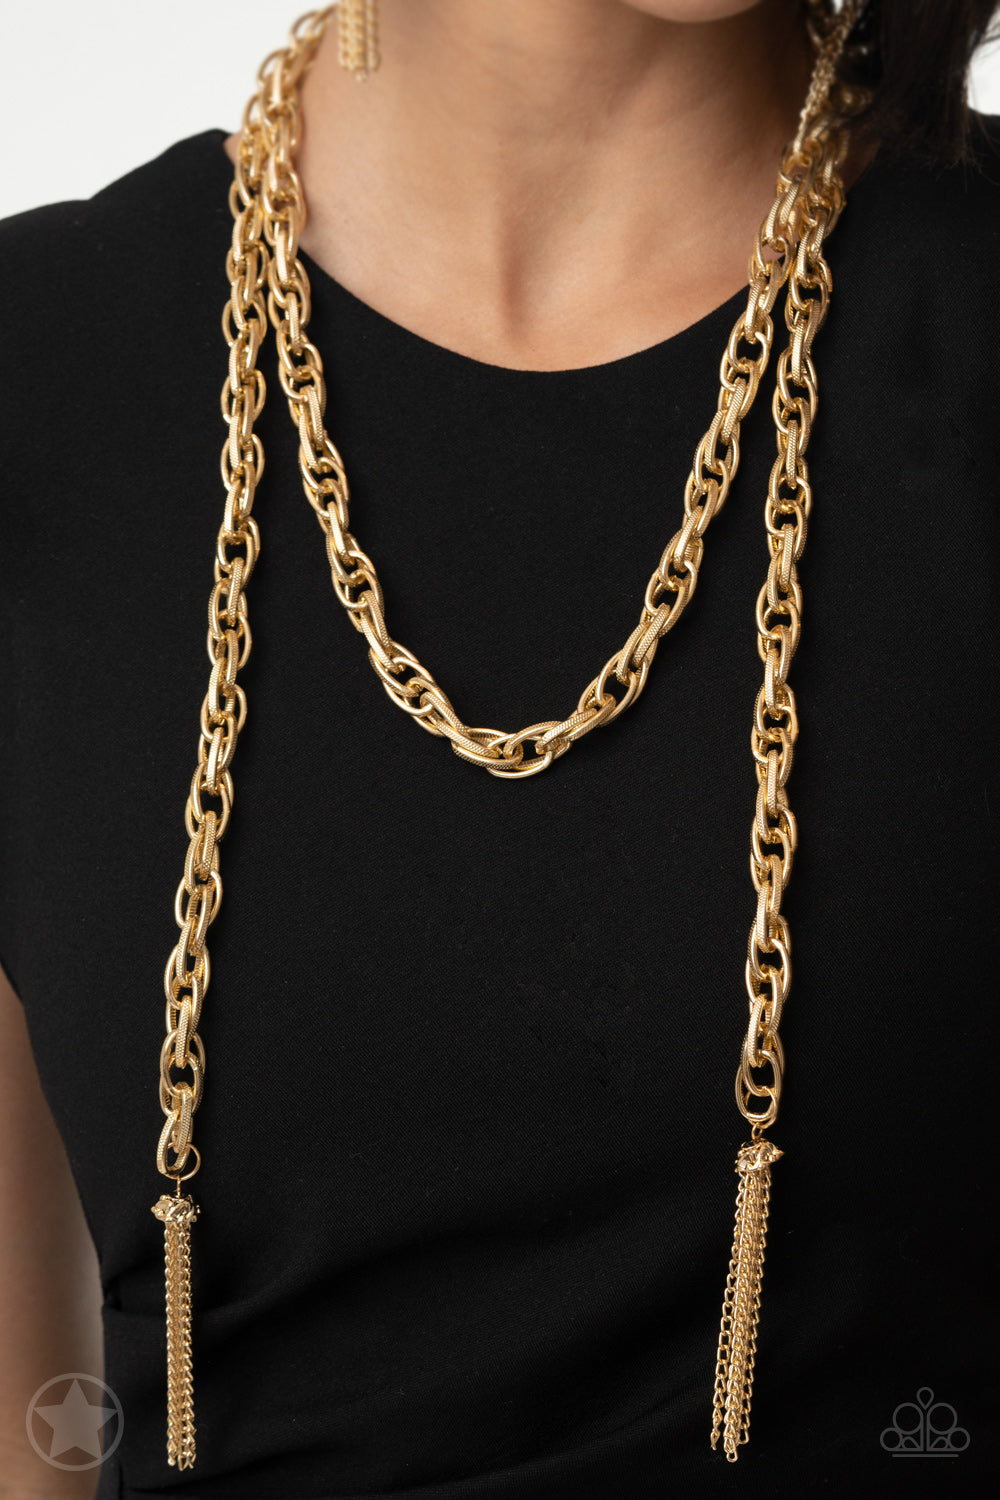 SCARFed for Attention - Gold Scarf Necklace - Paparazzi Accessories - A single strand of spiraling, interlocking links with light-catching texture is anchored by two tassels of chain that add dramatic length to the piece. Undeniably the most versatile piece in Paparazzi's history, the scarf necklace features FIVE different ways to accessorize: Open Layer, Loop, Traditional Wrap, Double Knot, and Nautical Knot. Sold as one individual necklace.